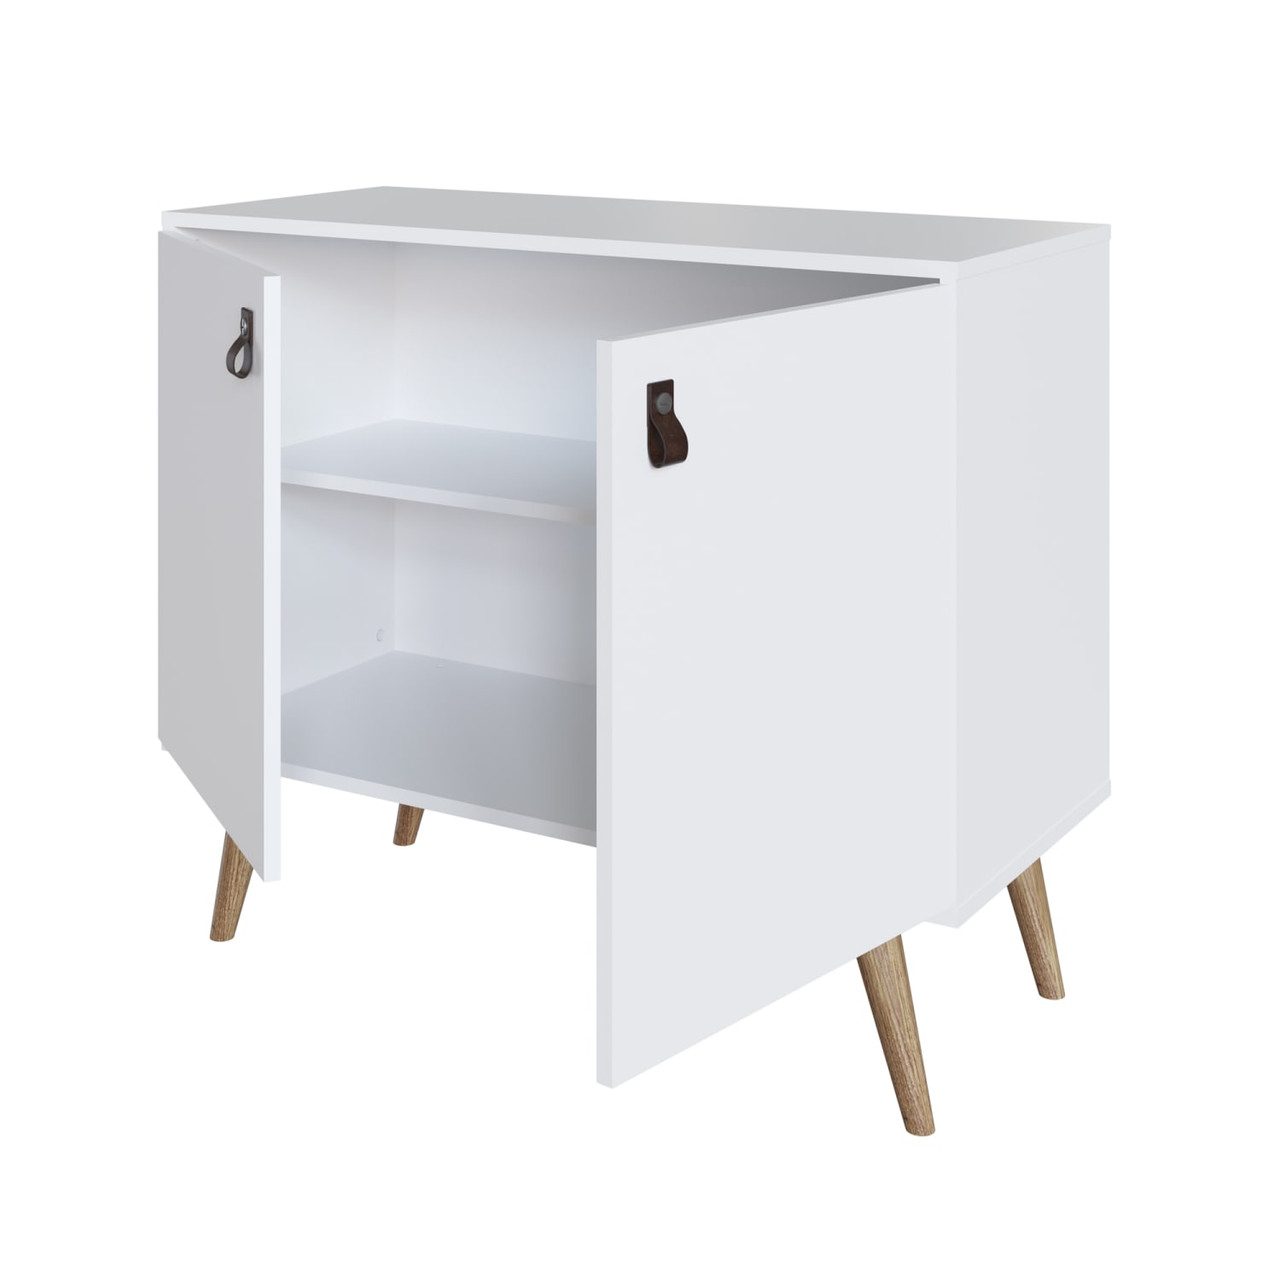 Amber Accent Cabinet with Faux Leather Handles in White